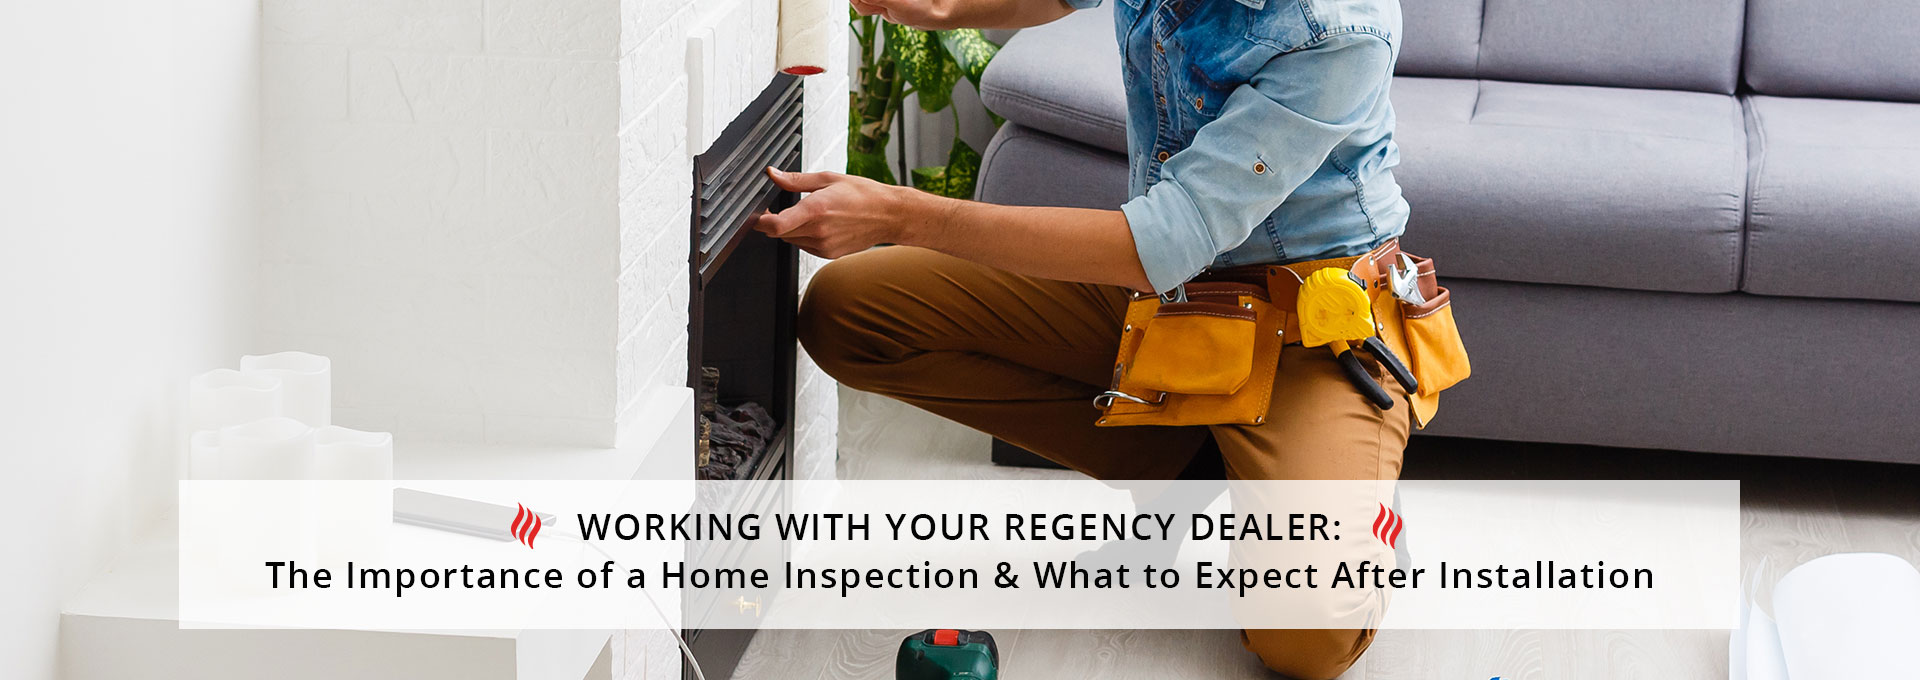 Working With Your Regency Dealer: The Importance of a Home Inspection & What to Expect After Installation  